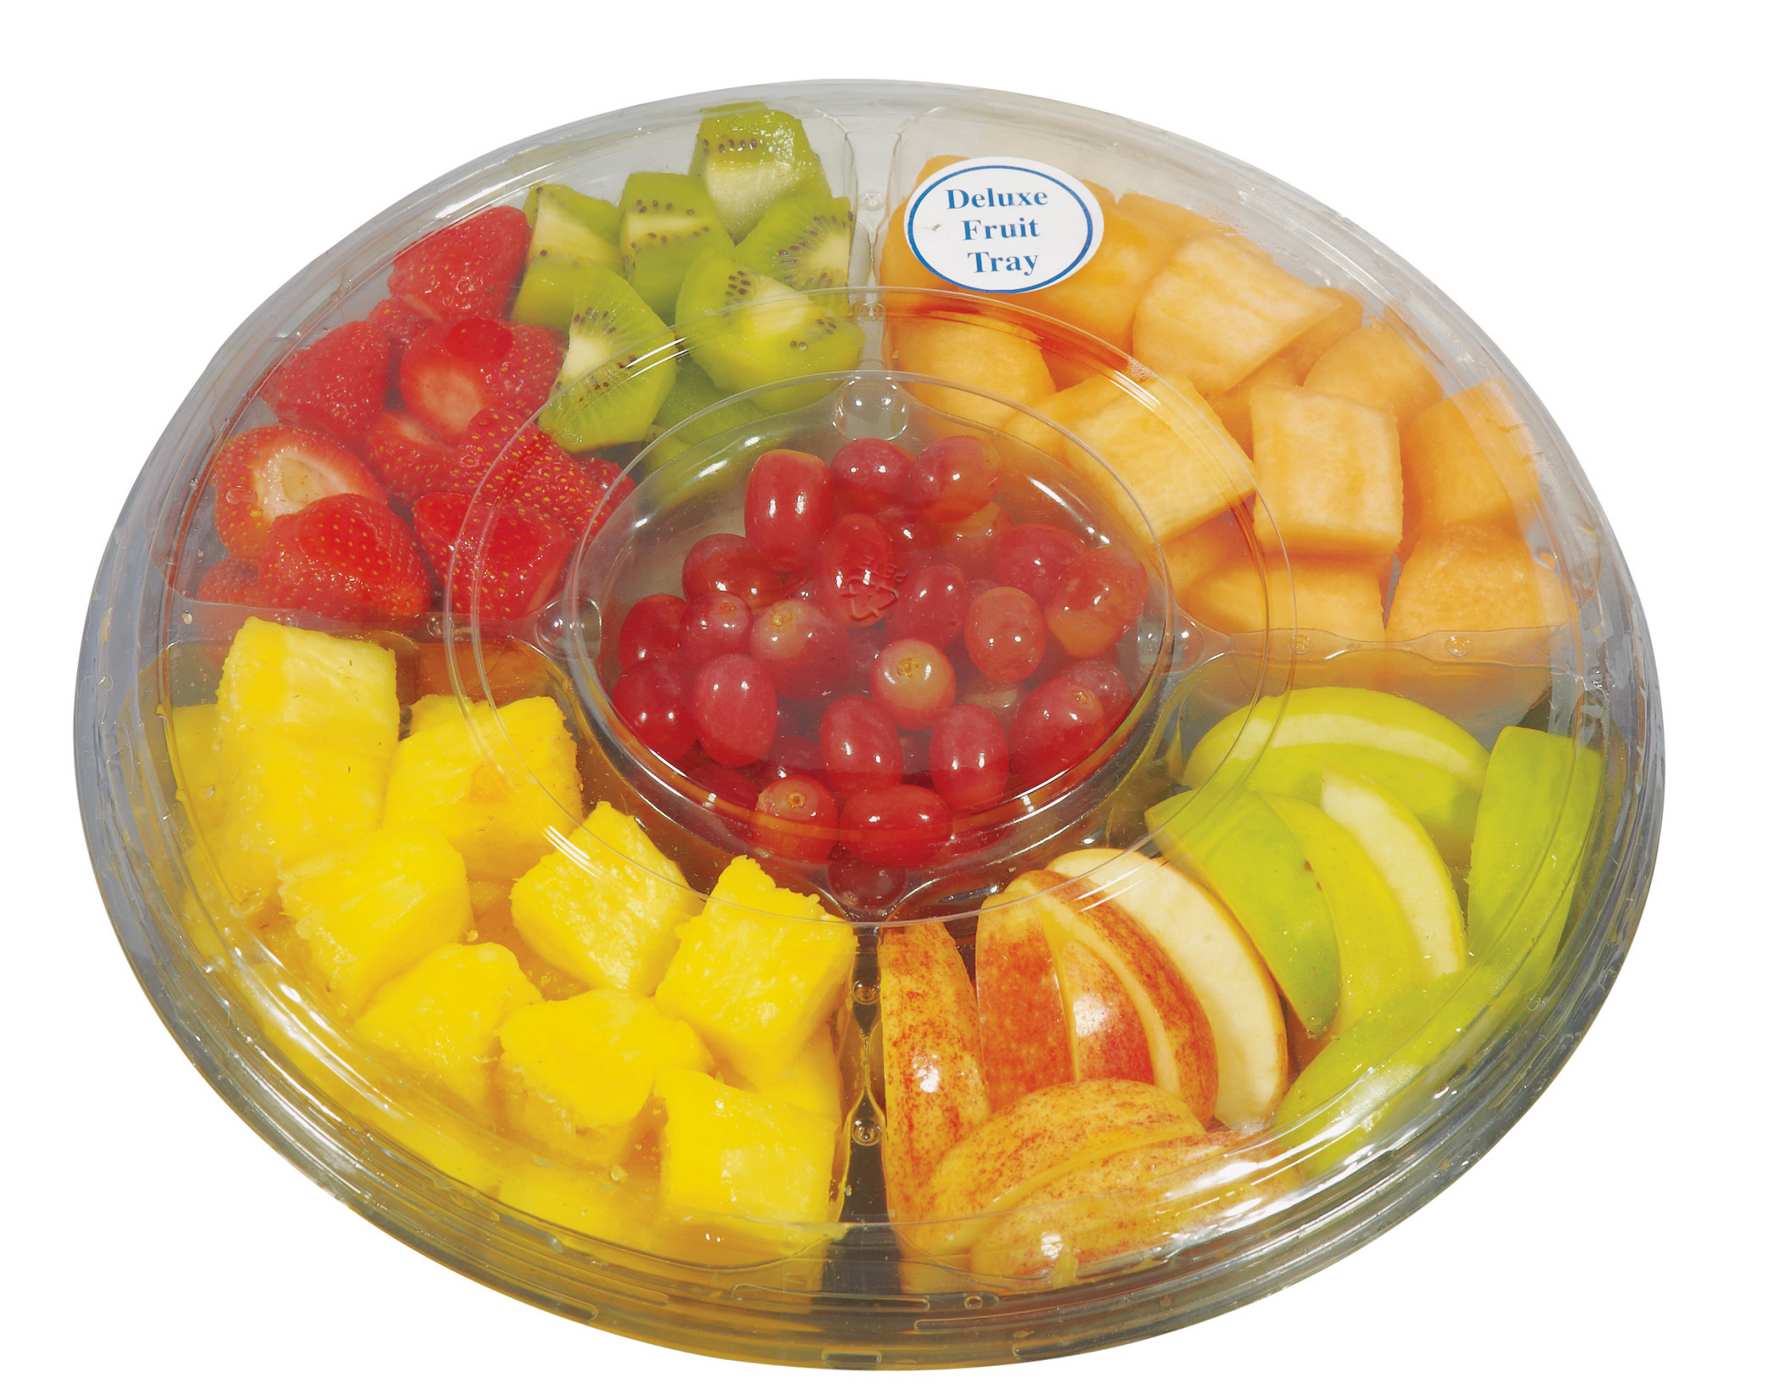 Fresh Fruit Party Tray - Deluxe; image 2 of 2